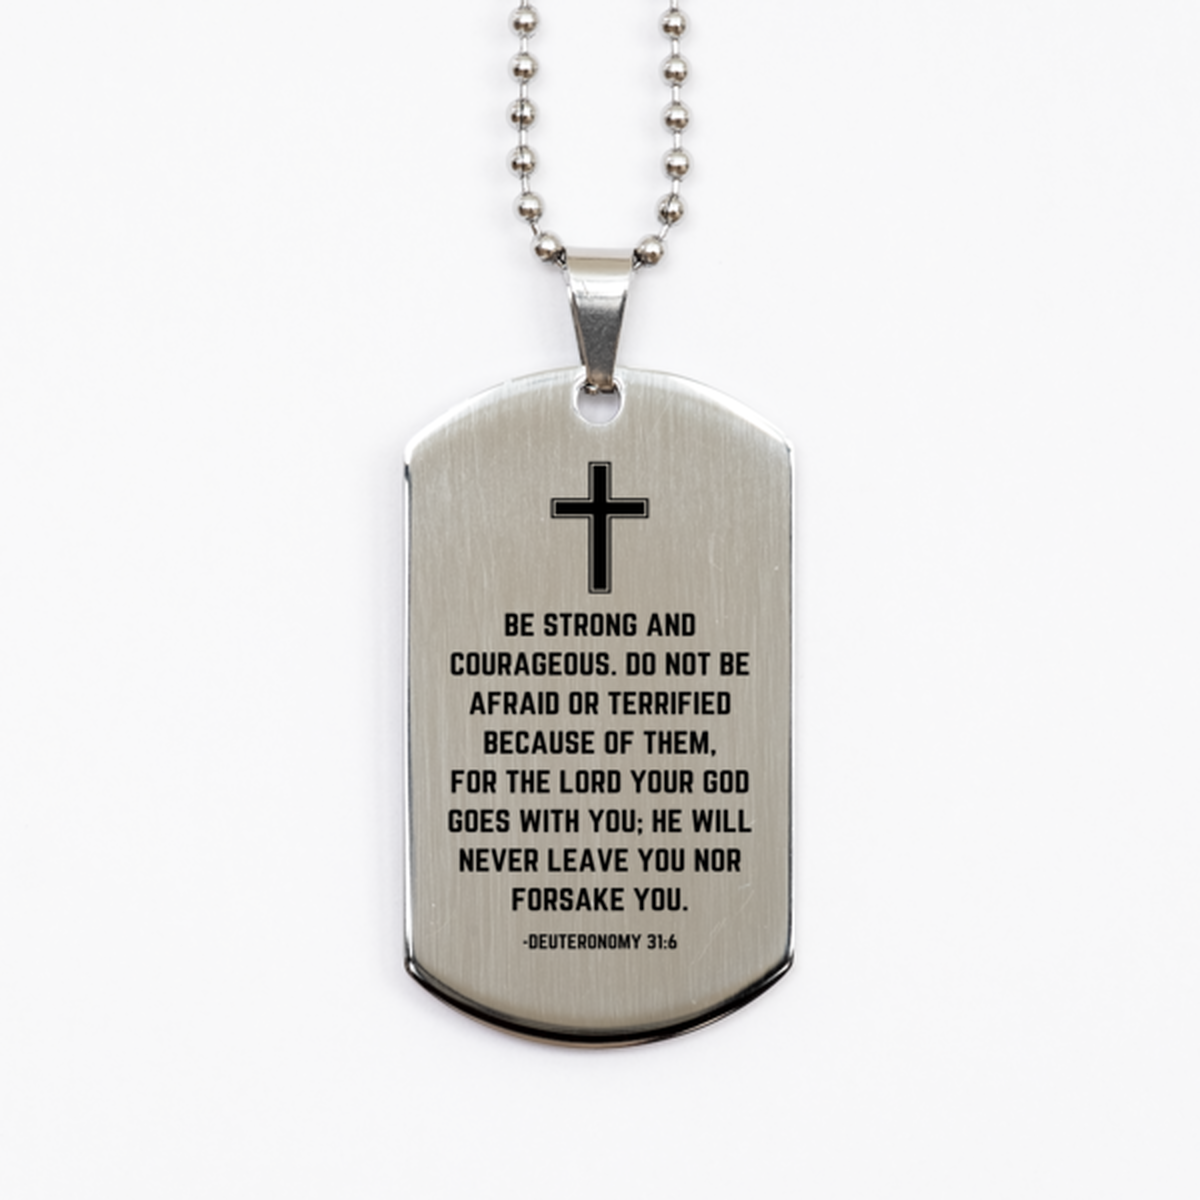 Baptism Gifts For Teenage Boys Girls, Christian Bible Verse Silver Dog Tag, He will never leave you nor forsake you, Confirmation Gifts, Bible Verse Necklace for Son, Godson, Grandson, Nephew